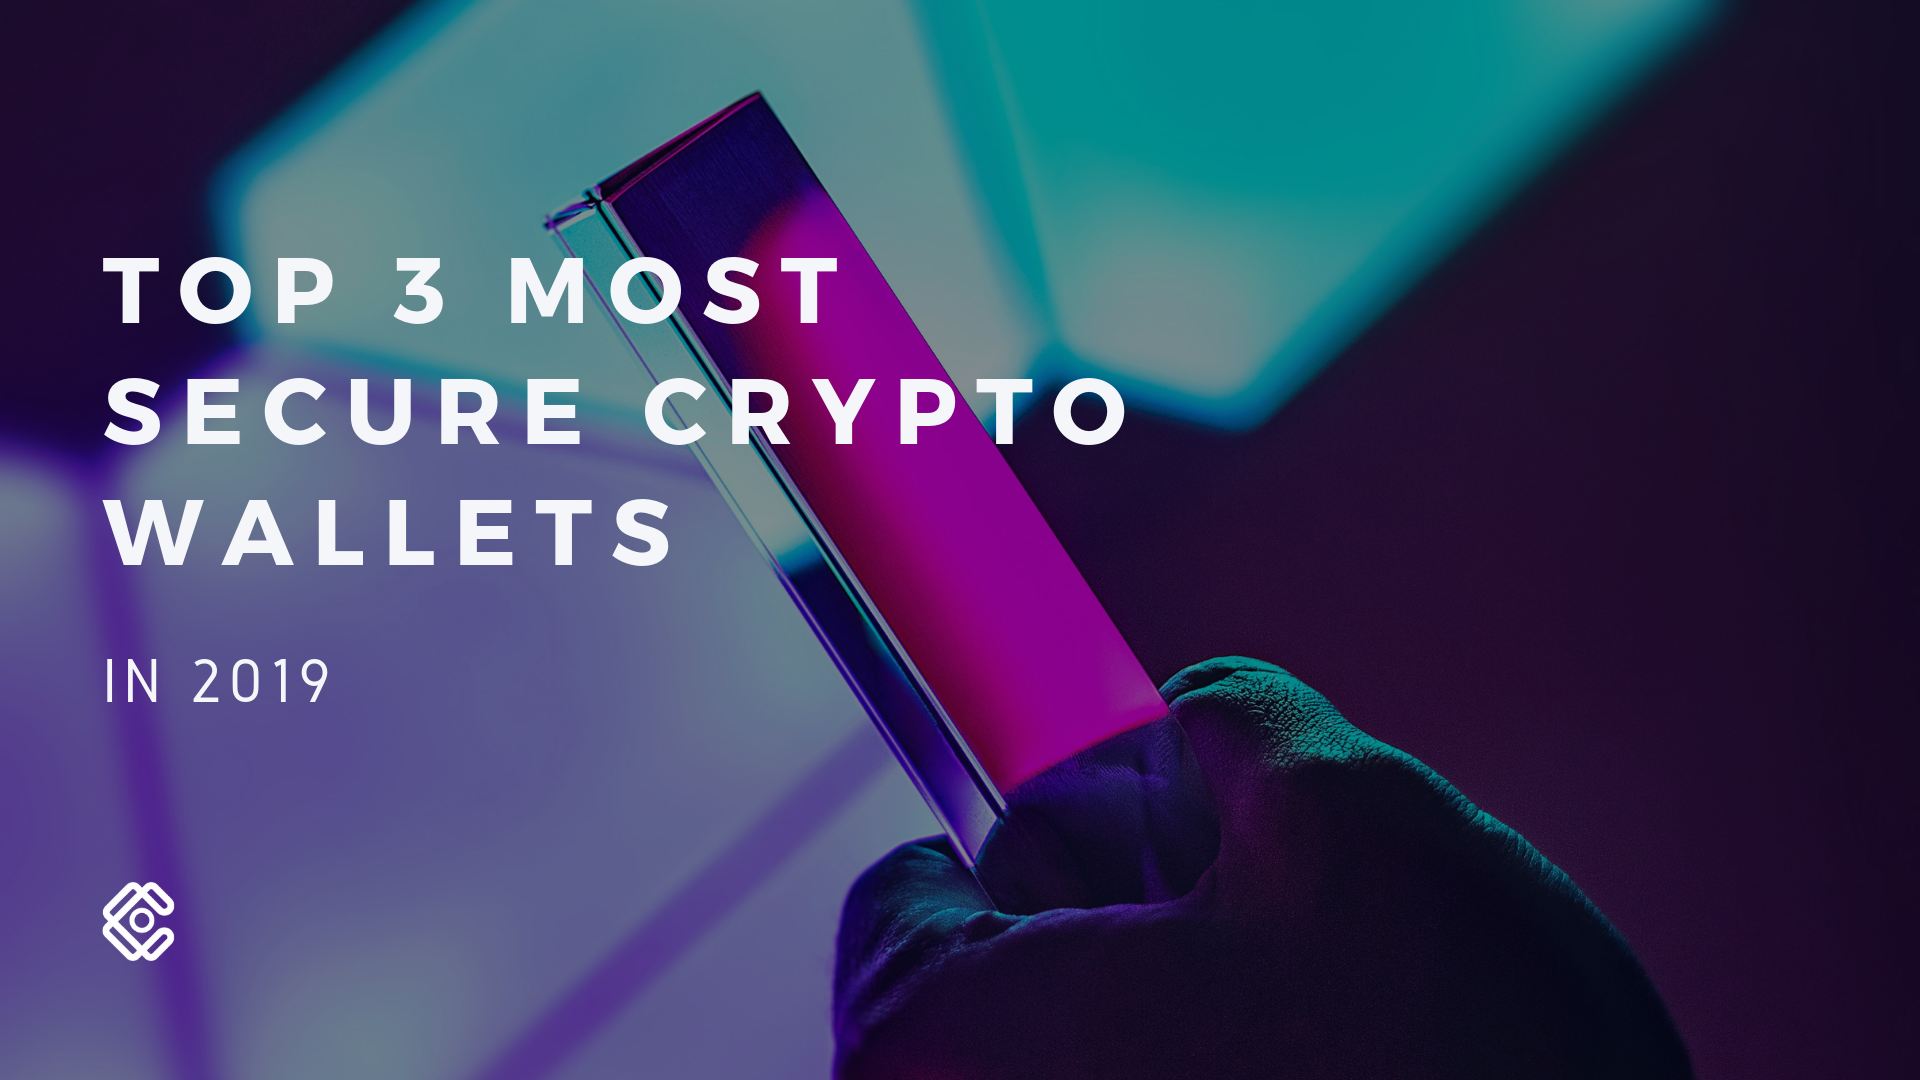 Top 3 Most Secure Crypto Wallets - 4C-Trading - Medium